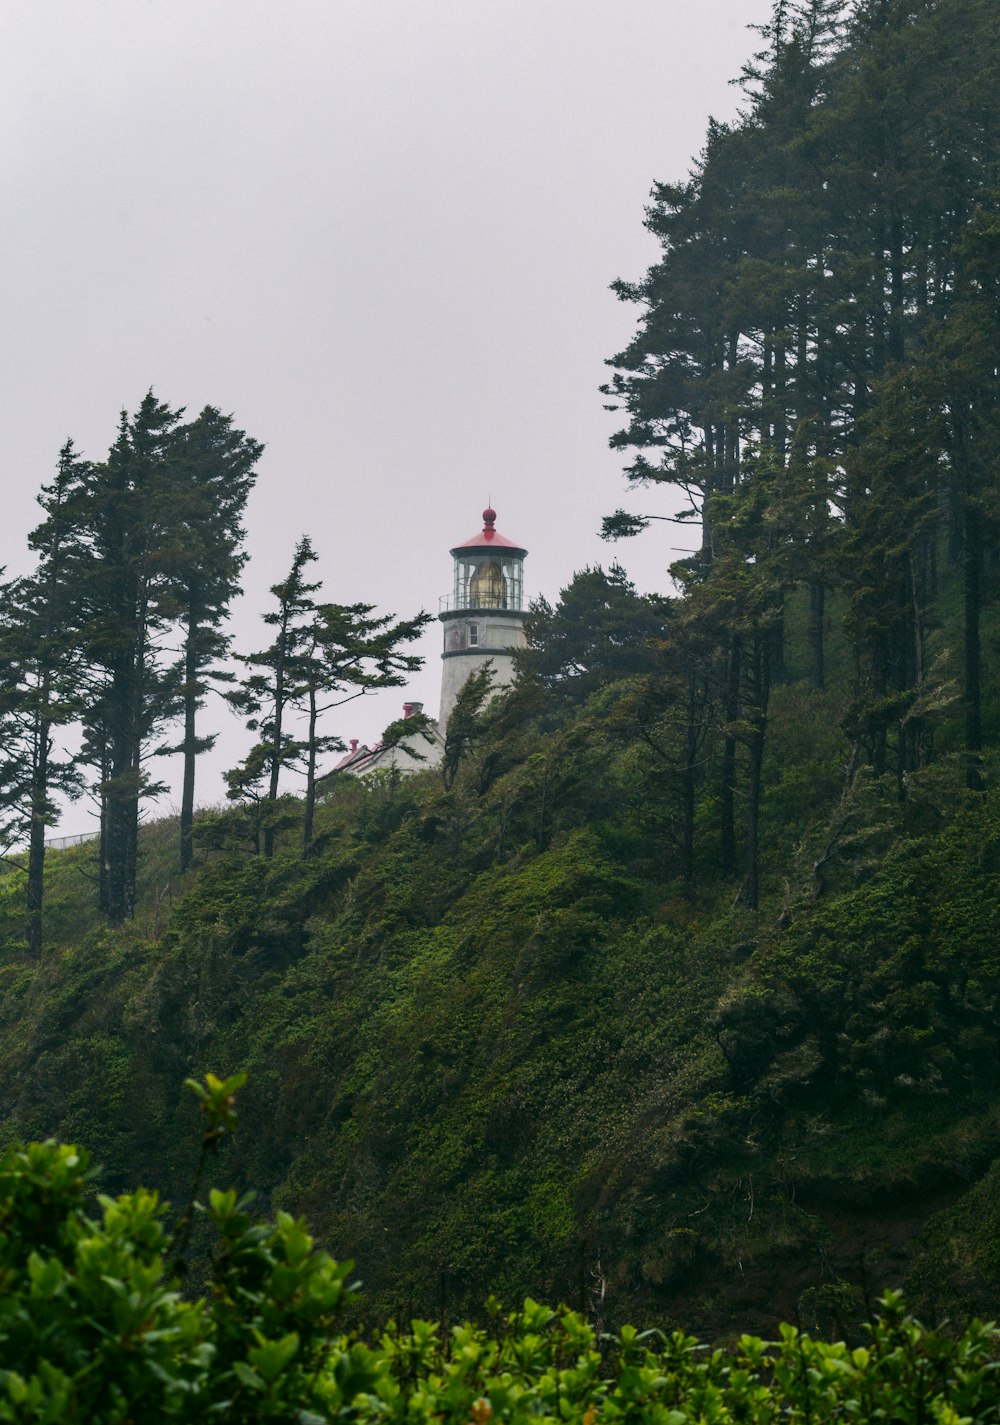 a light house sitting on top of a lush green hillside